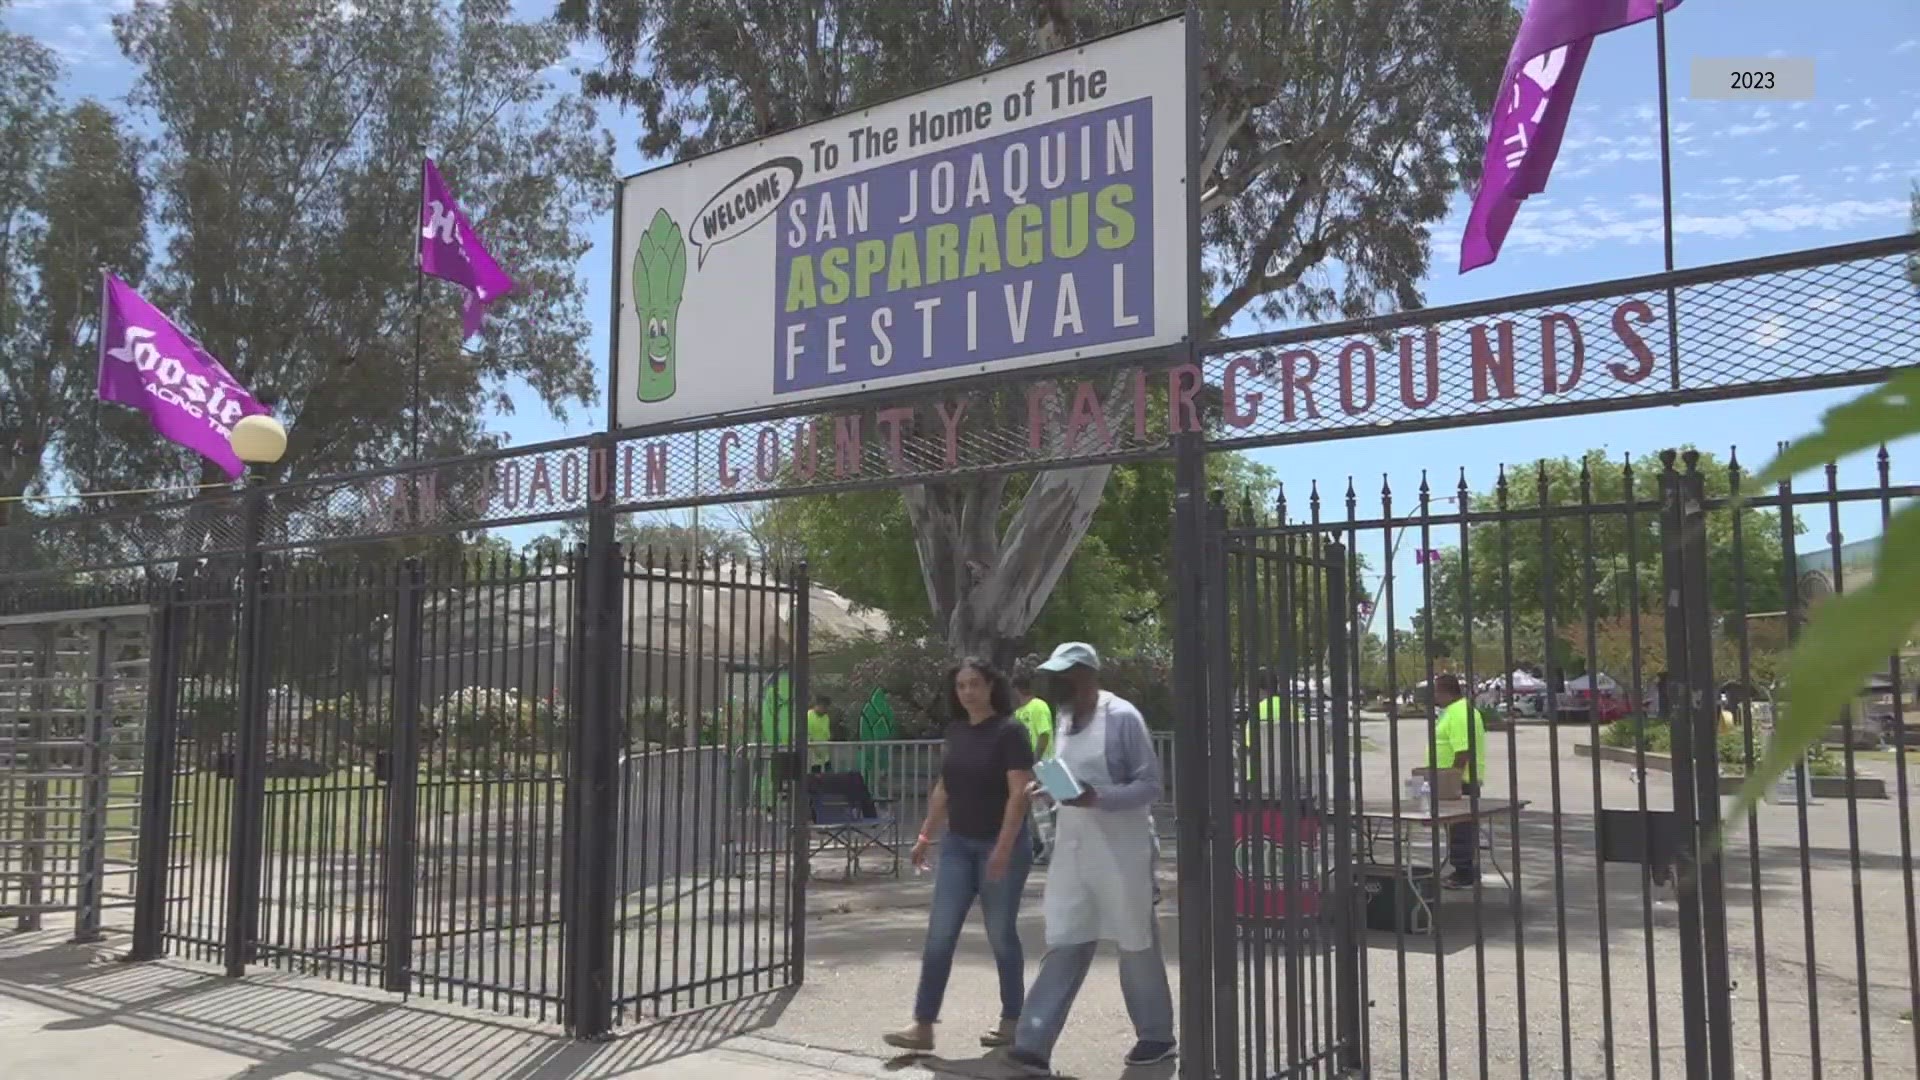 The San Joaquin Asparagus Festival is happening April 12, 13 and 14.